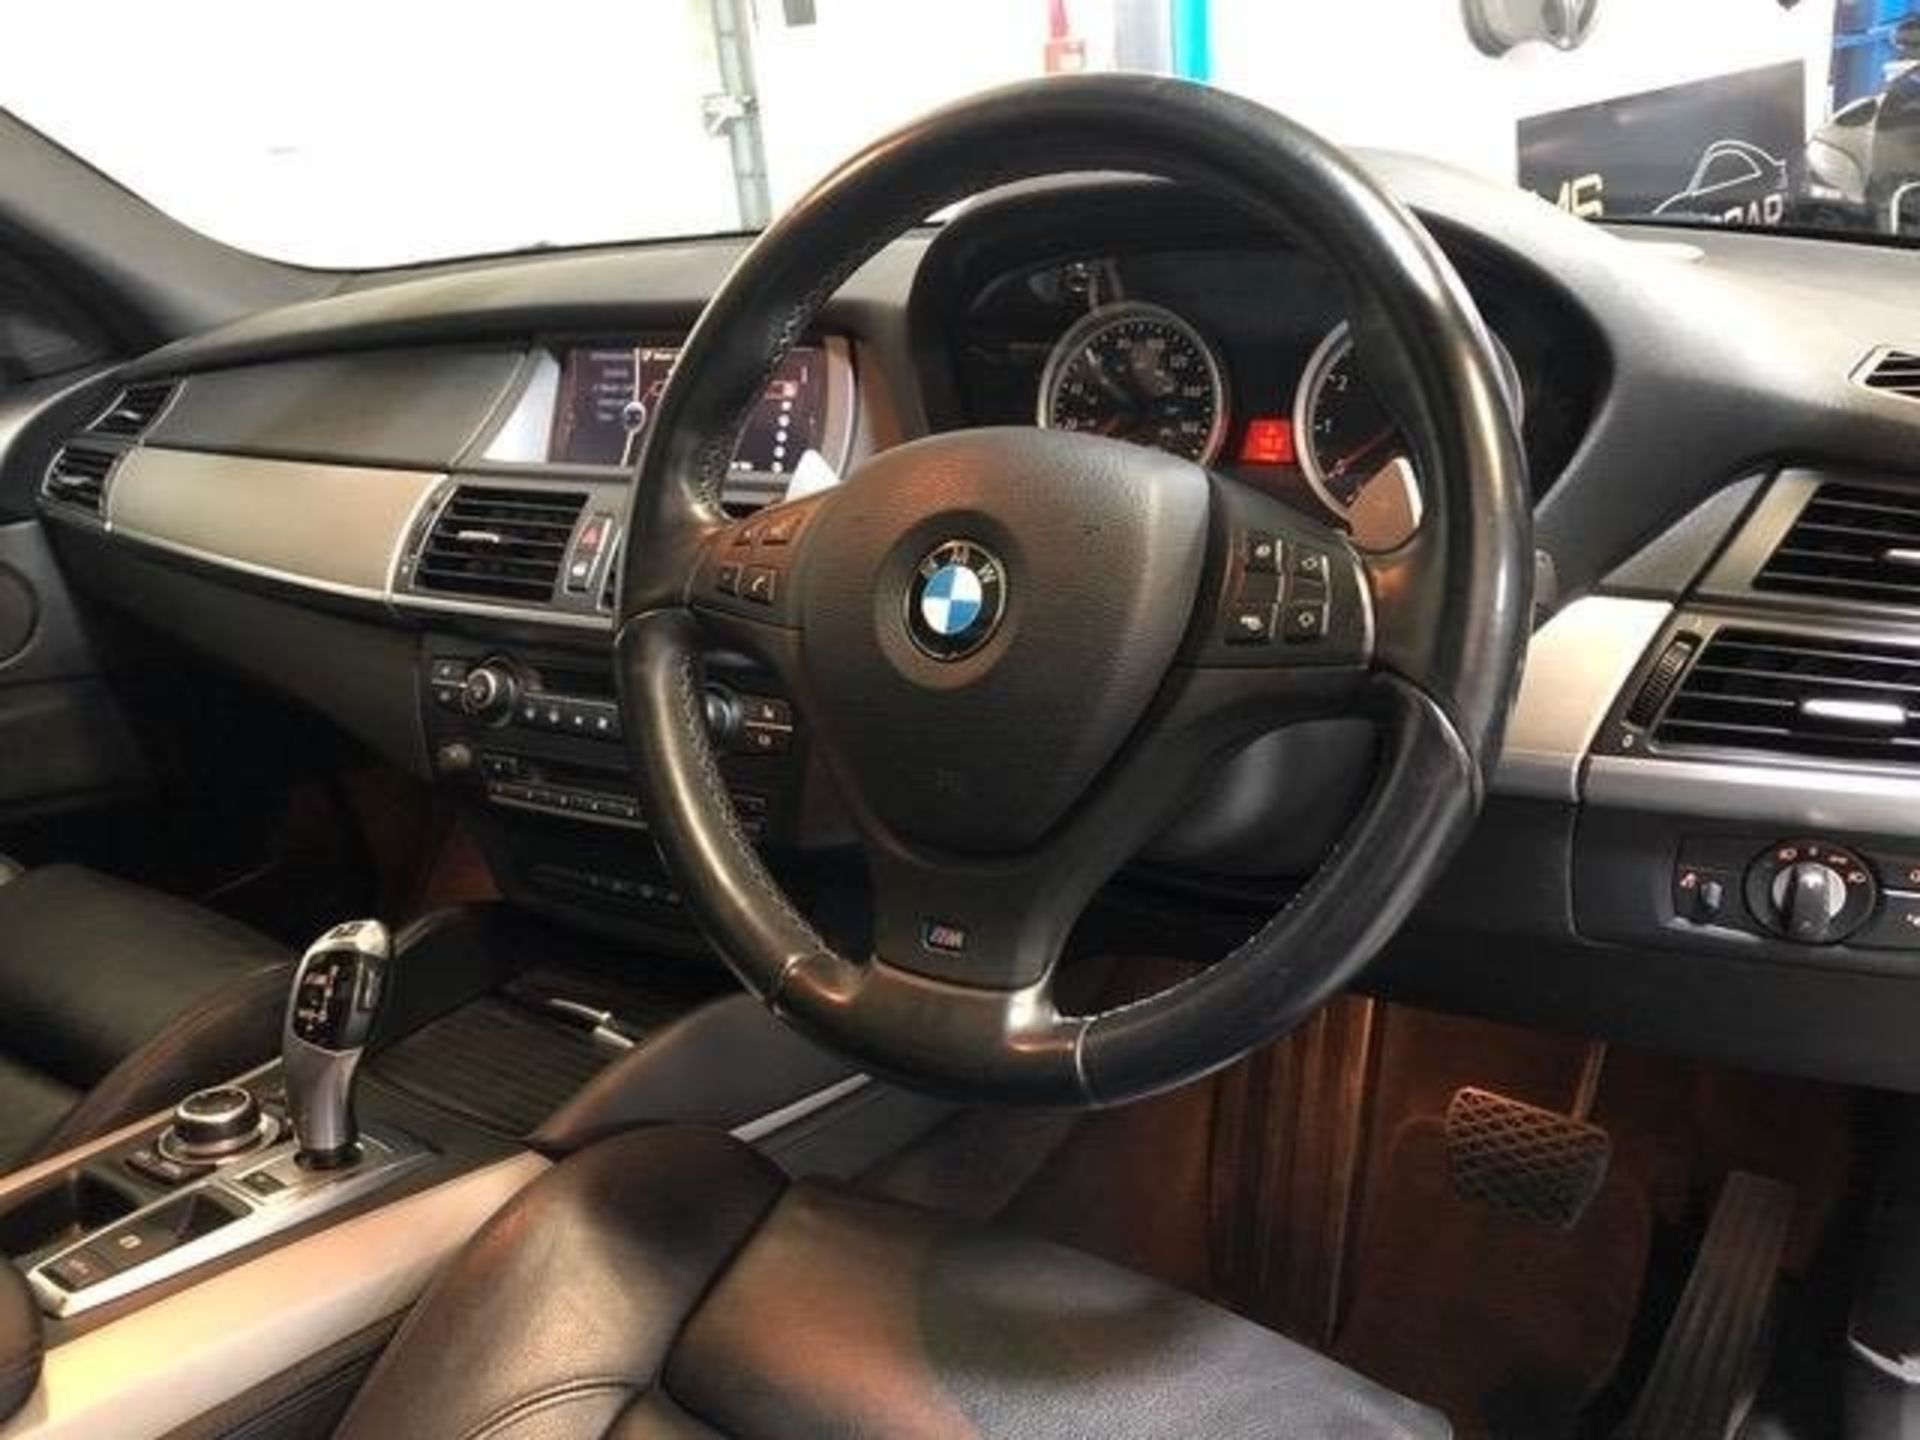 2009 BMW X5 M Registration Number:YH59 FFM Chassis Number: TBA Recorded Mileage: 125,000 miles - Two - Bild 8 aus 17